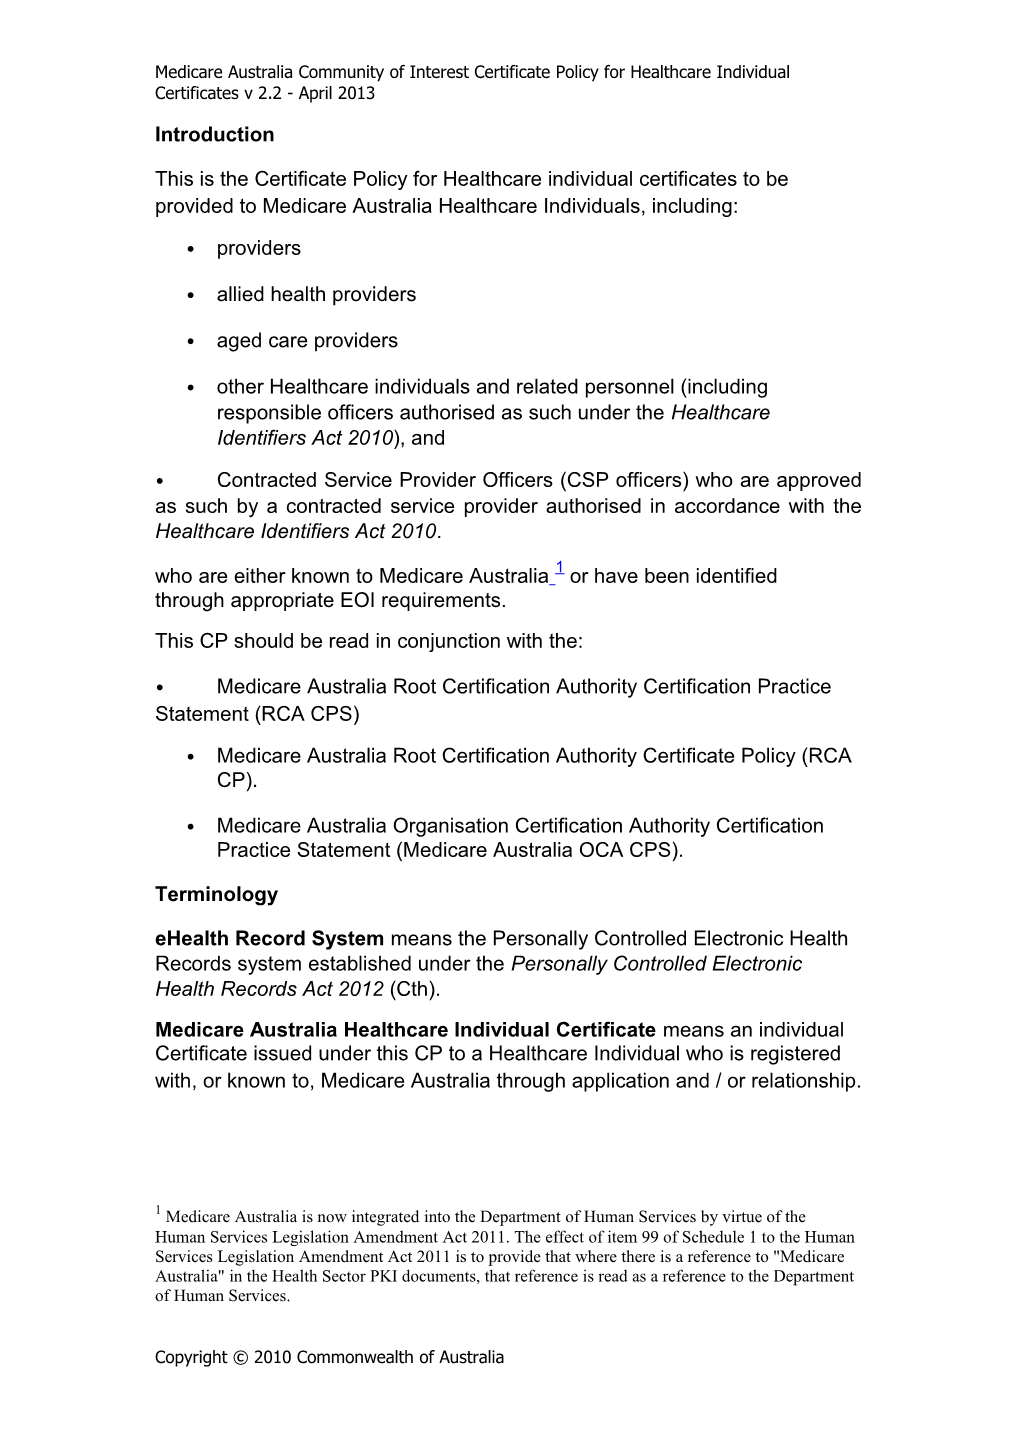 Medicare Australia Community of Interestcertificate Policy for Healthcare Individual